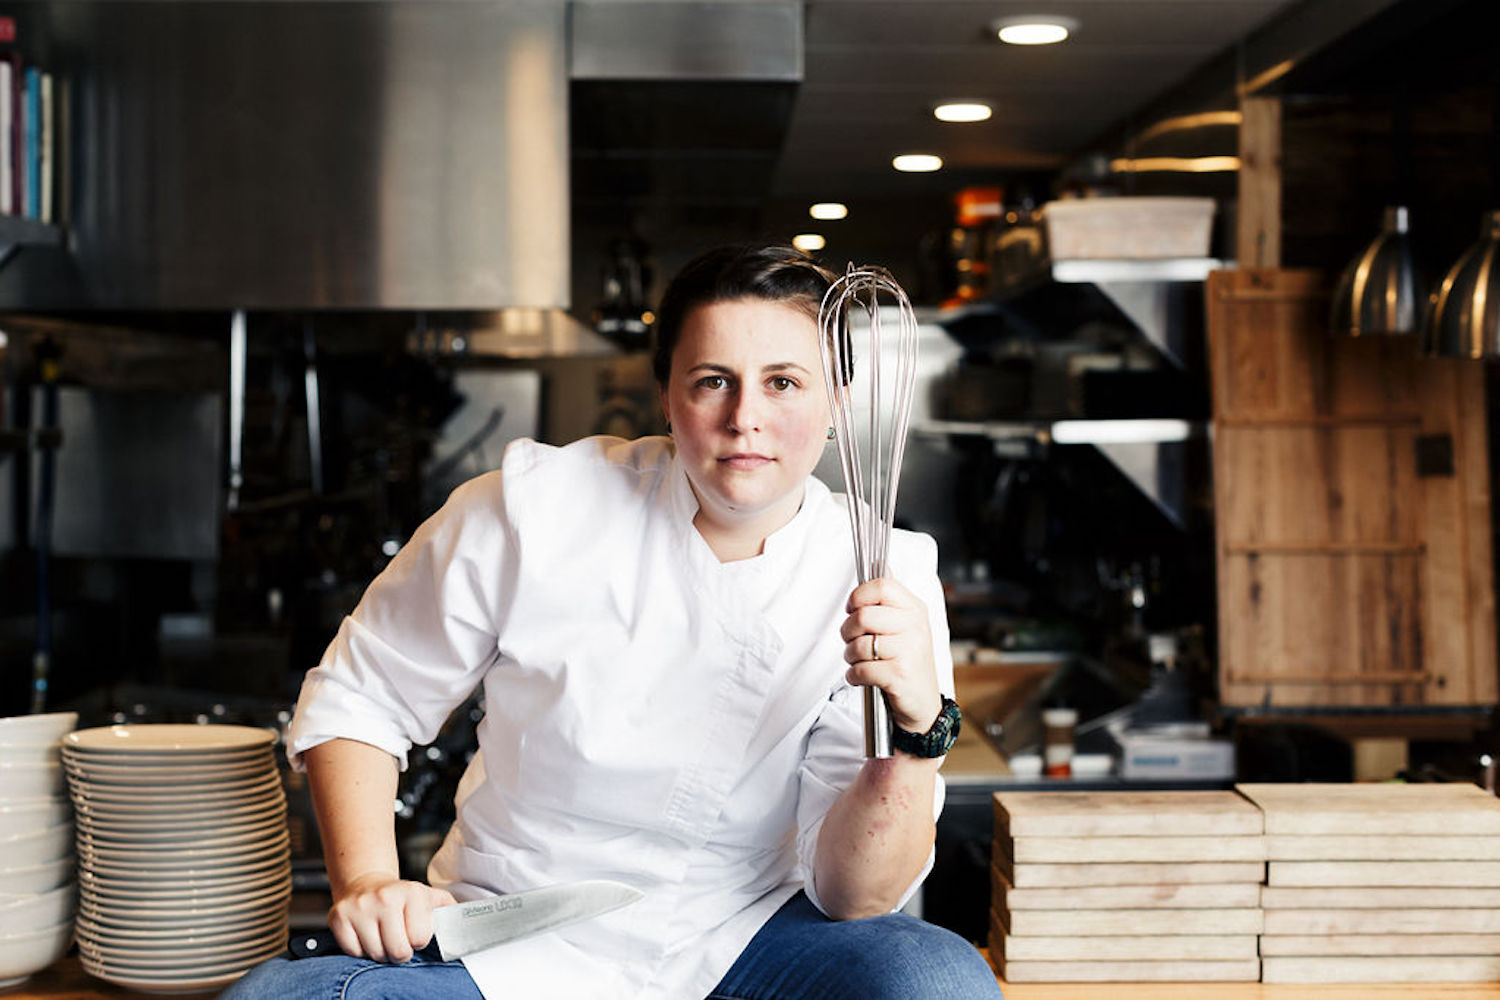 Chef Michele Hunter is the chef de cuisine of Hamlet & Ghost restaurant serving American cuisine in Saratoga Springs, New York.